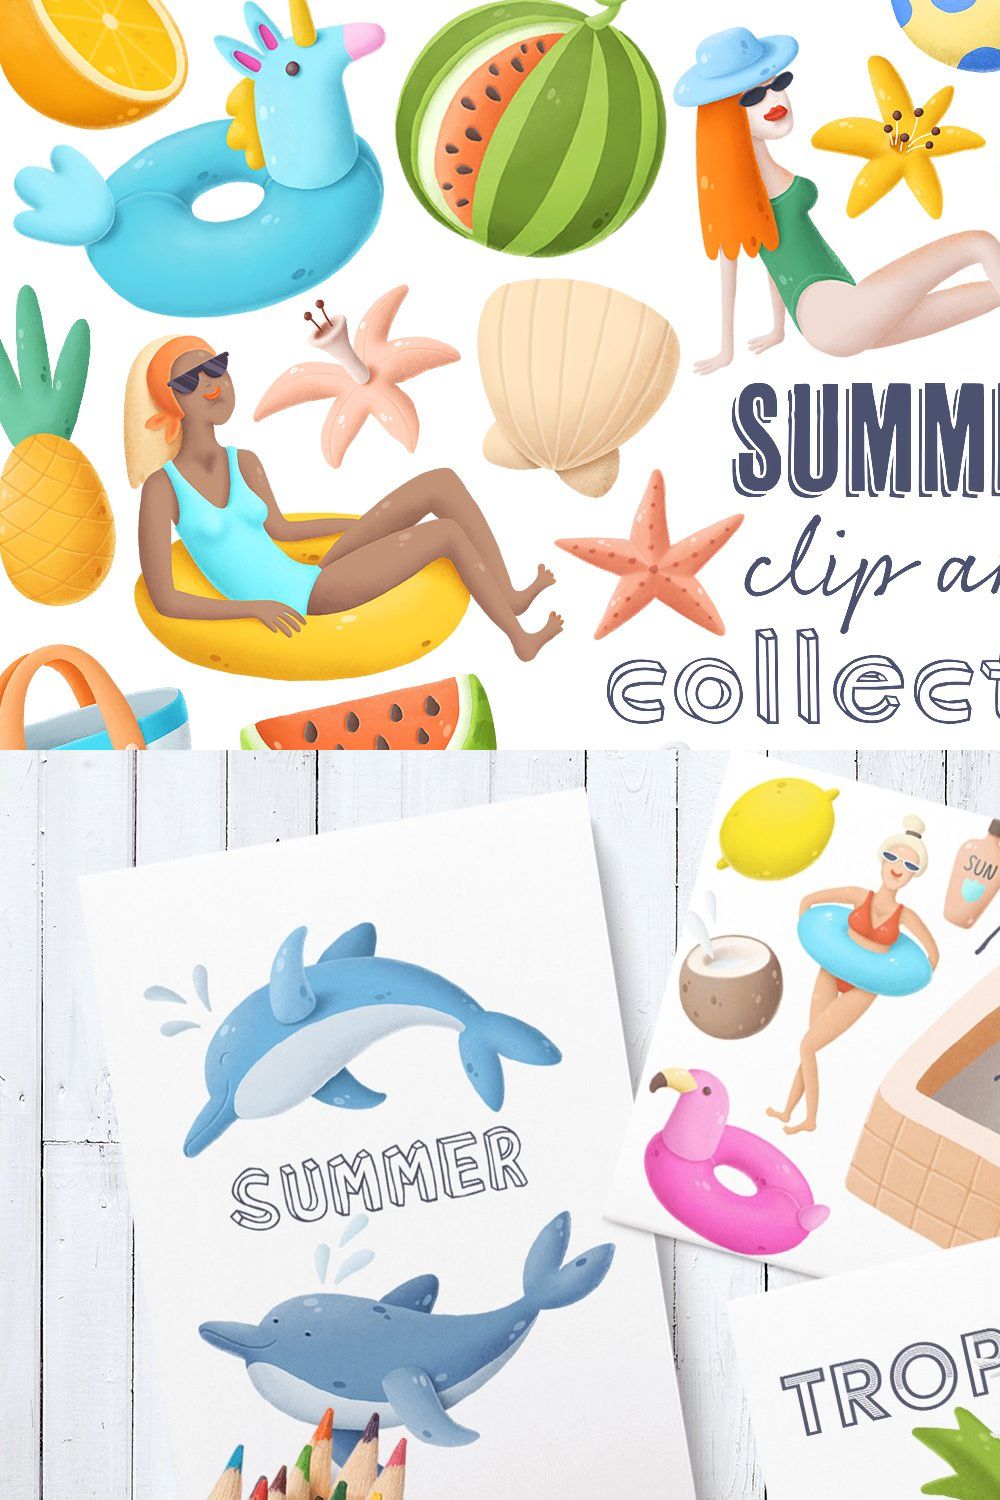 Summer clipart pinterest preview image.